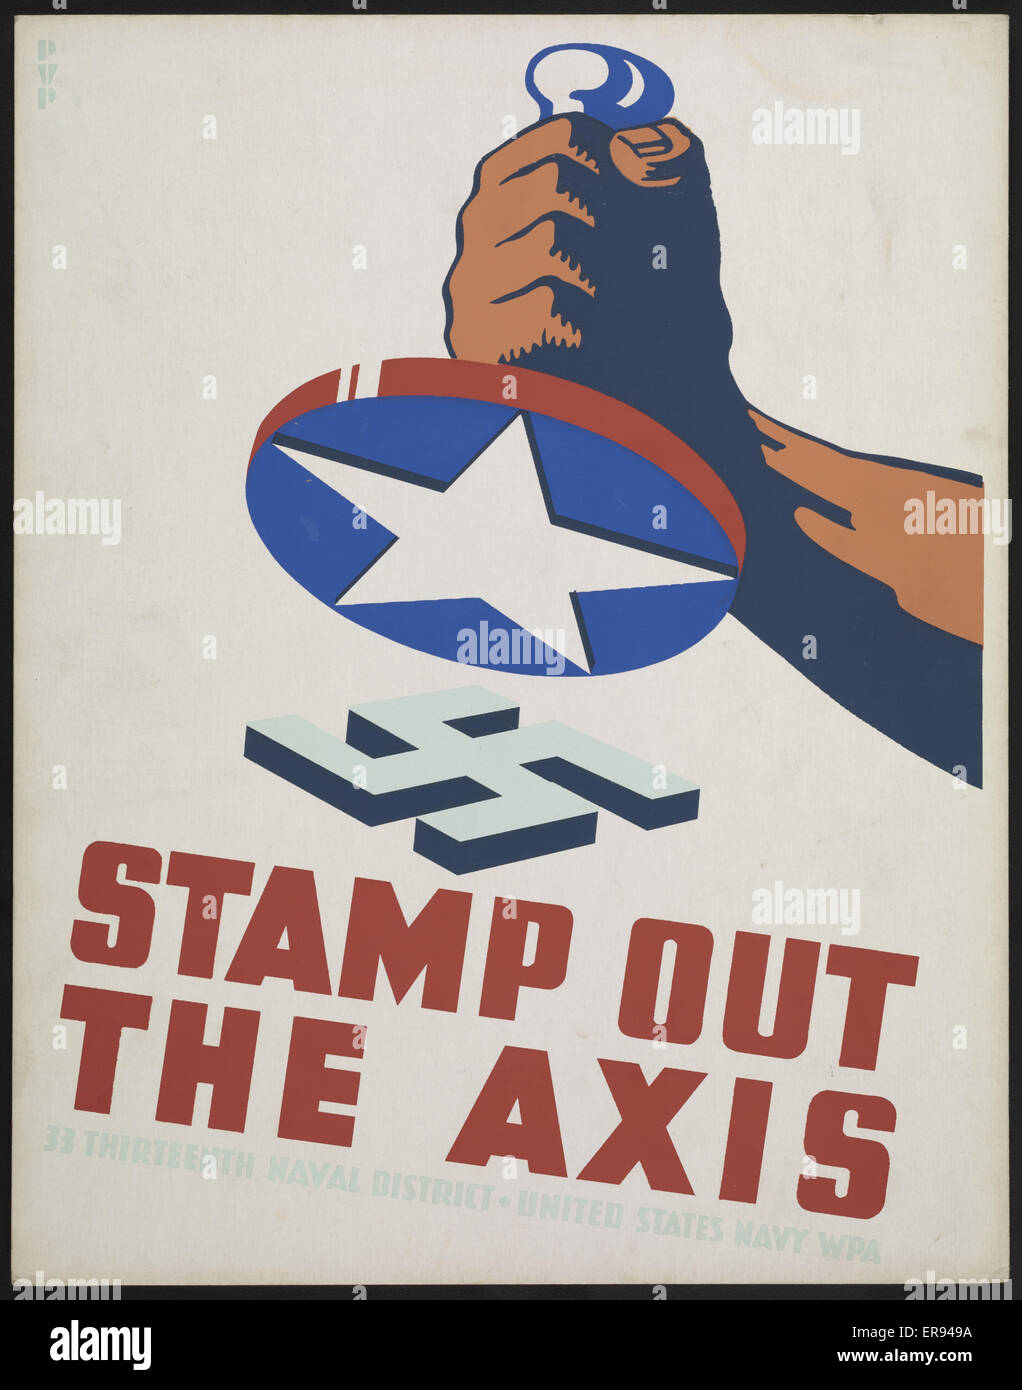 Stamp out the Axis Stock Photo